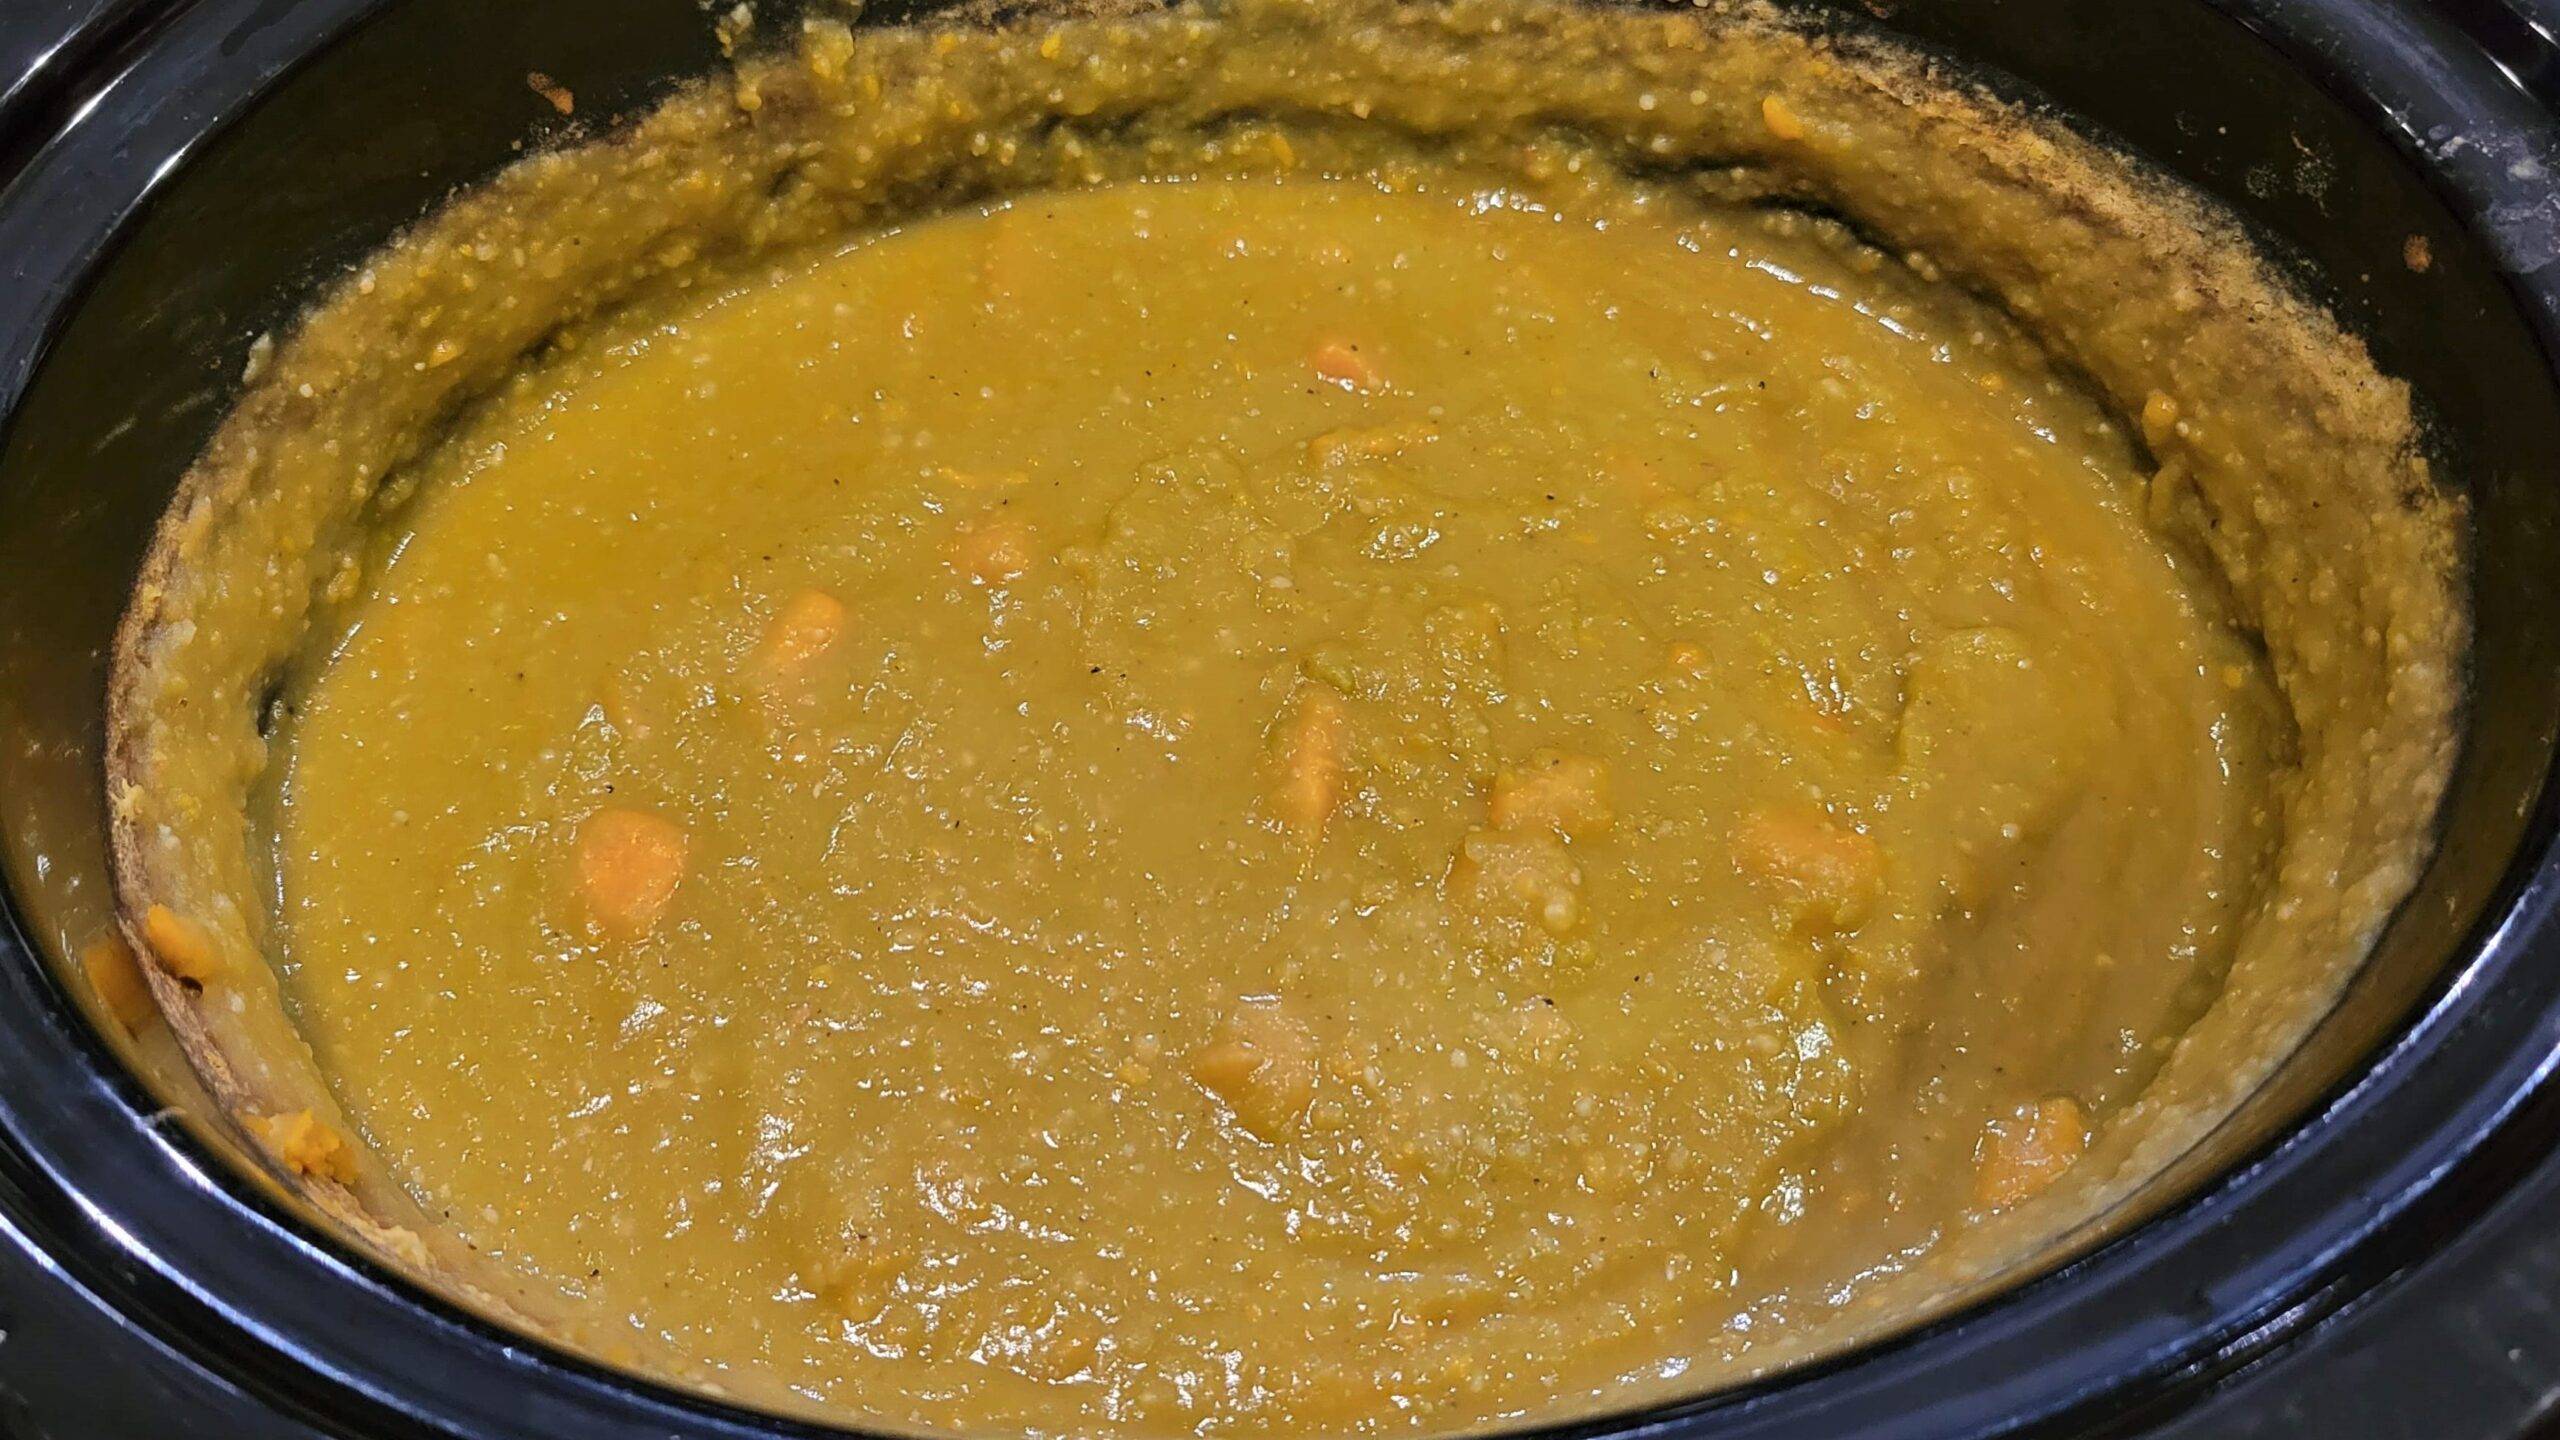 Crockpot Pea Soup - Dining in with Danielle